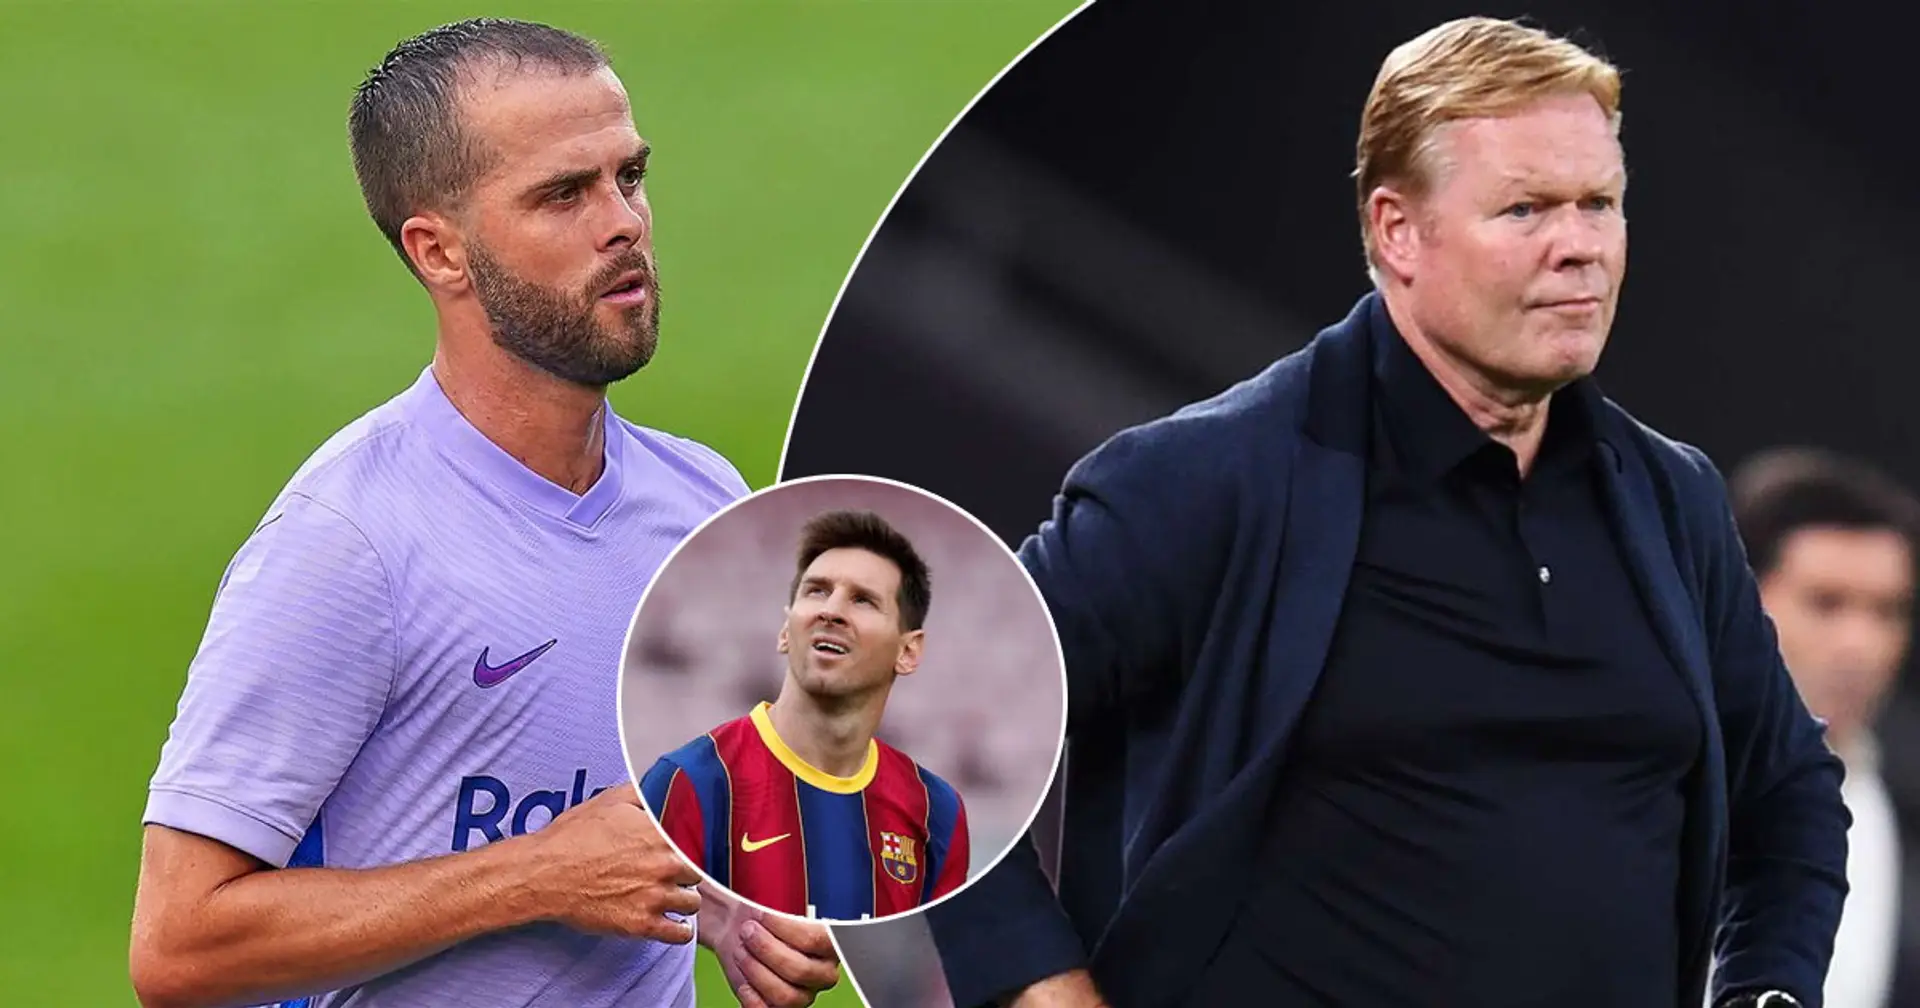 Pjanic: 'Even Messi didn't understand why Koeman didn't play me more'